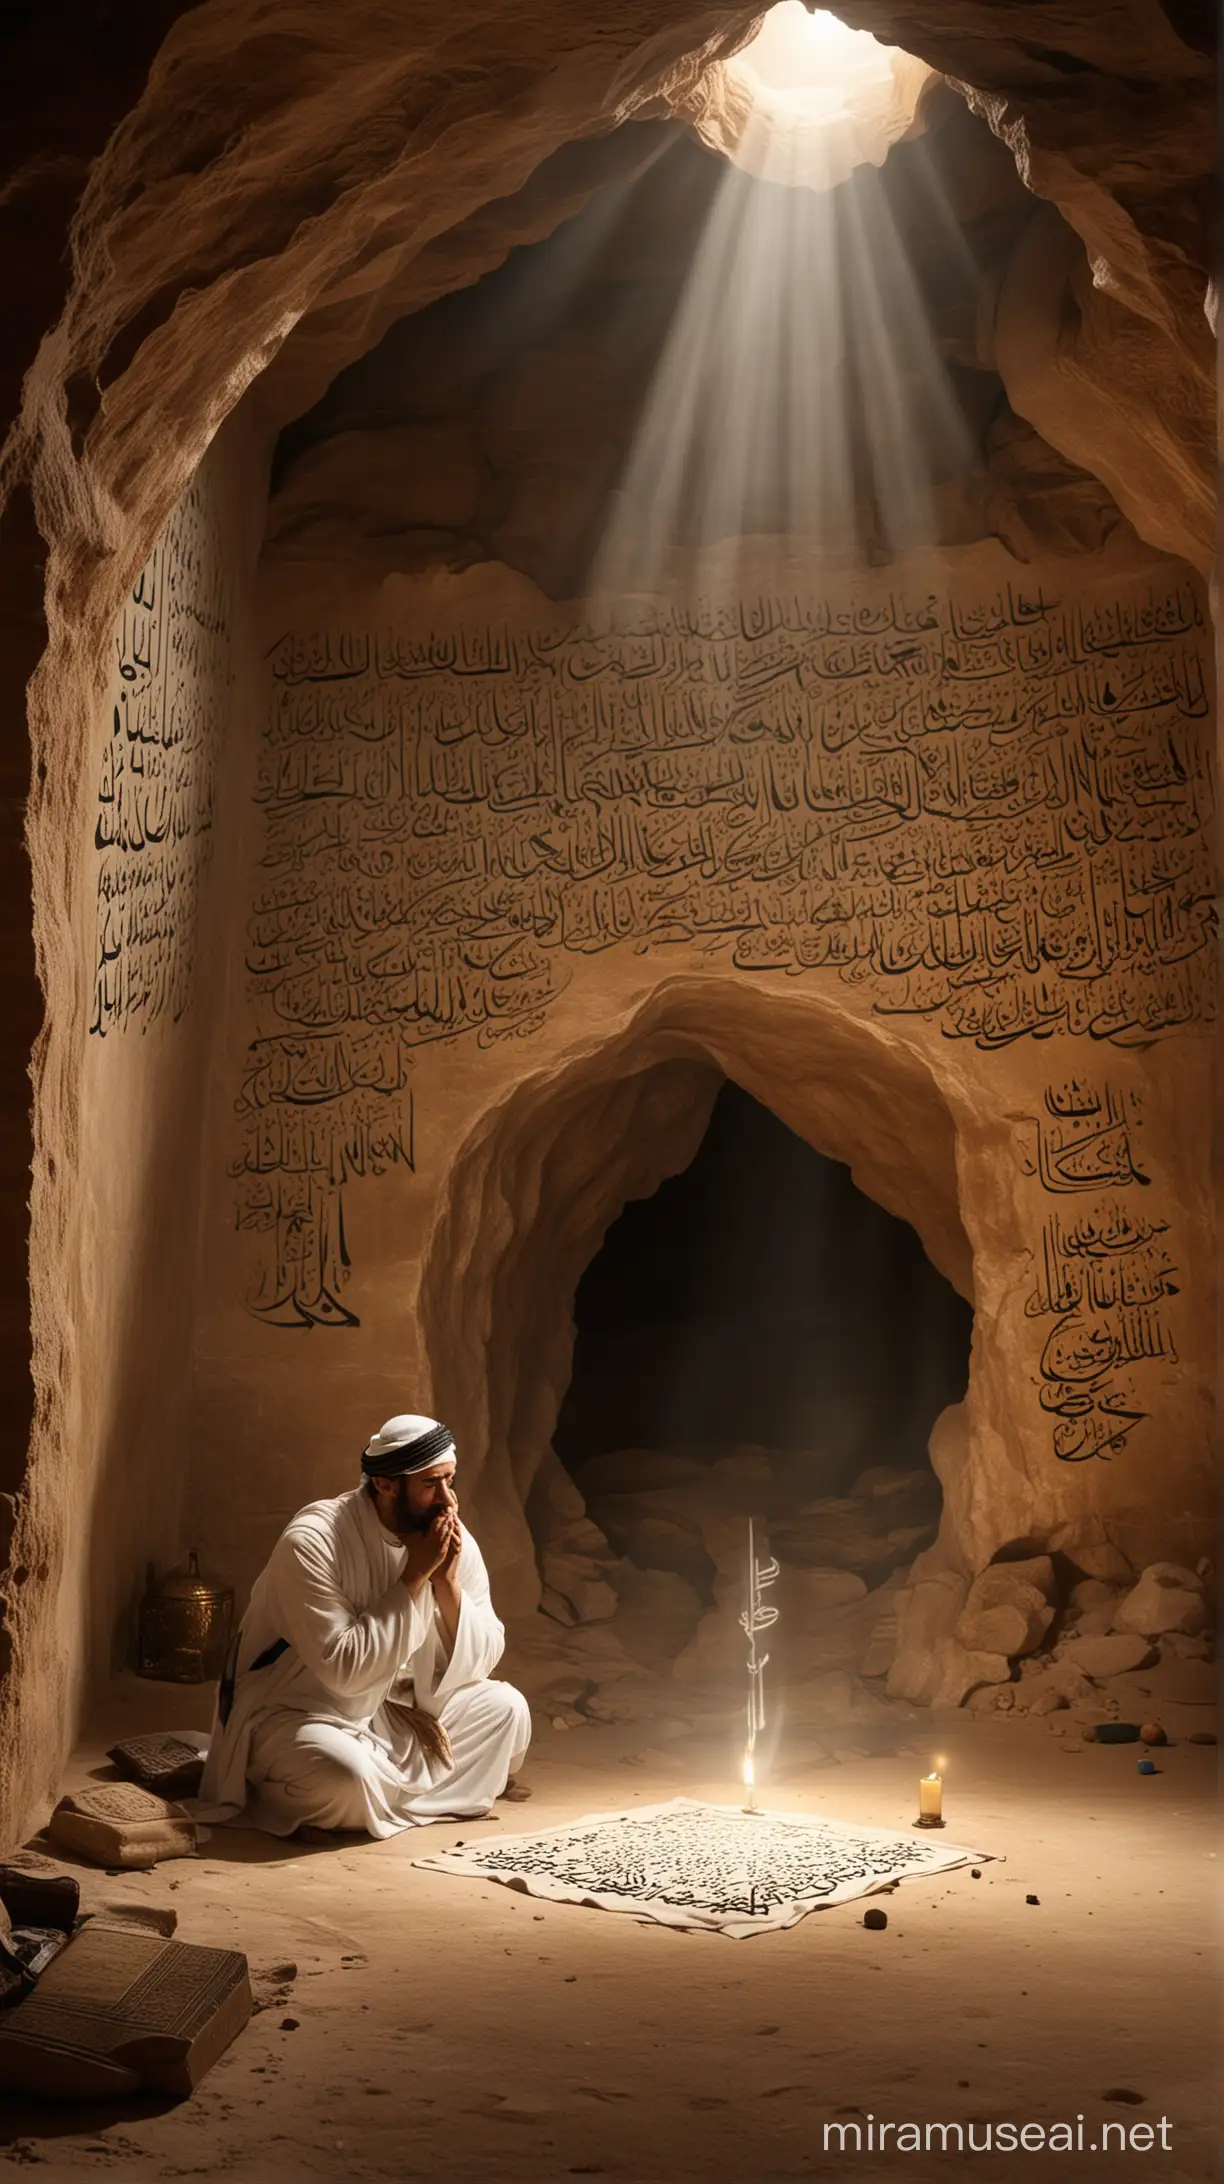 Divine Revelation:  Prophet Muhammad (PBUH) sits stunned, clutching his head, after receiving the first verses from the Angel Gabriel. The words "Iqra!" (اقْرَأْ) appear in Arabic calligraphy above him. (Cave interior, dramatic lighting) HD and $k with islamic tradition